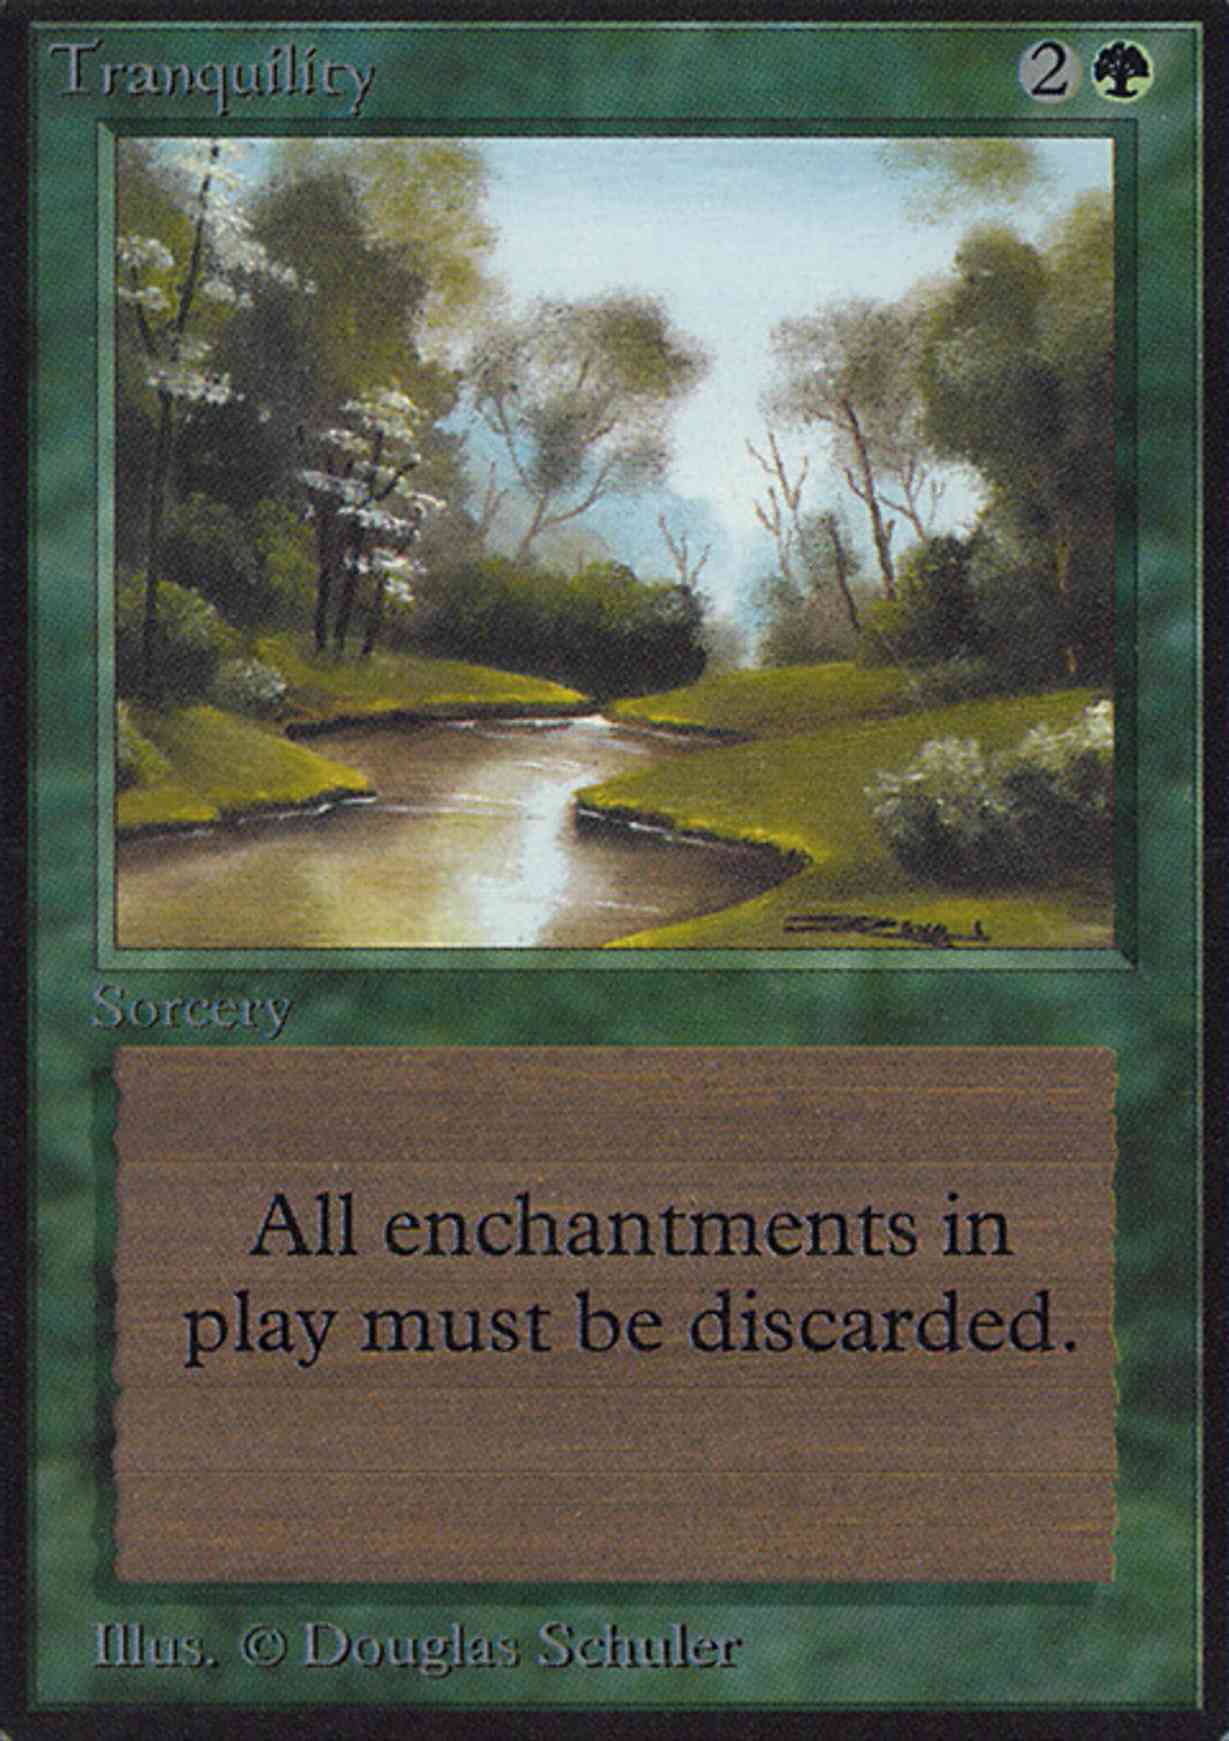 Tranquility magic card front